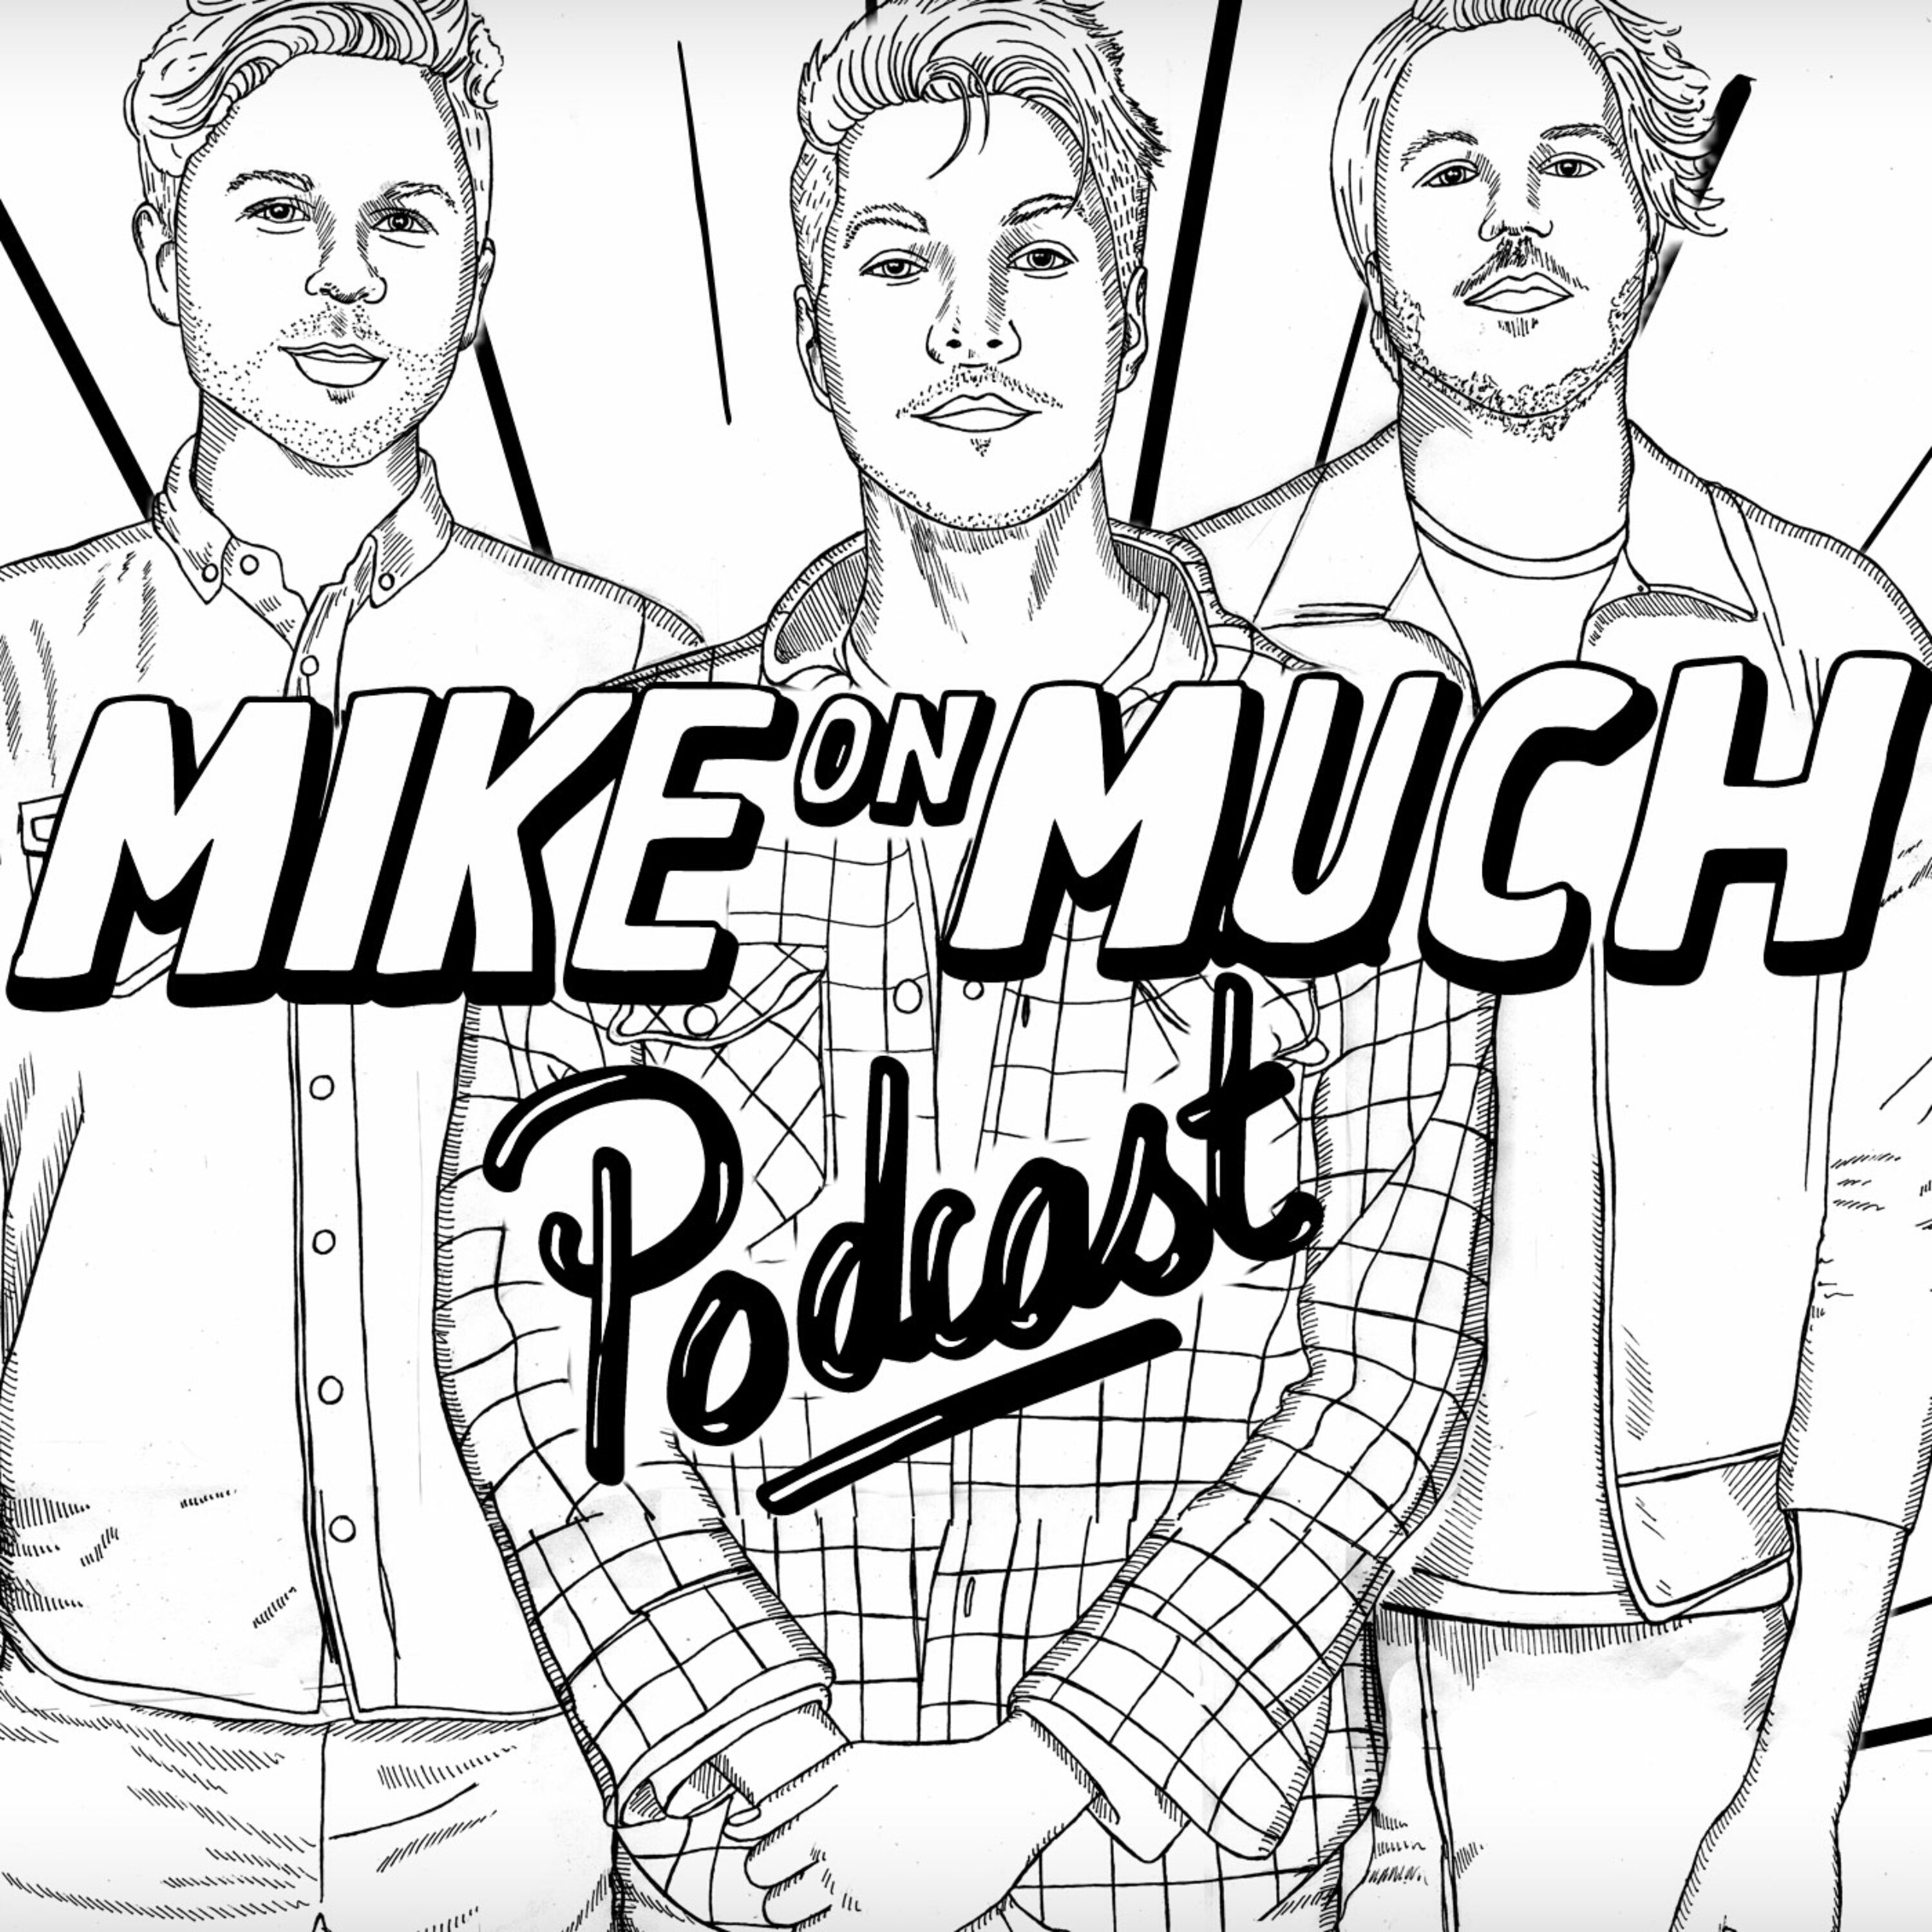 Season 1 Mike On Much: “If He’s So F*ckin Funny, Why Isn’t He on the Podcast?”